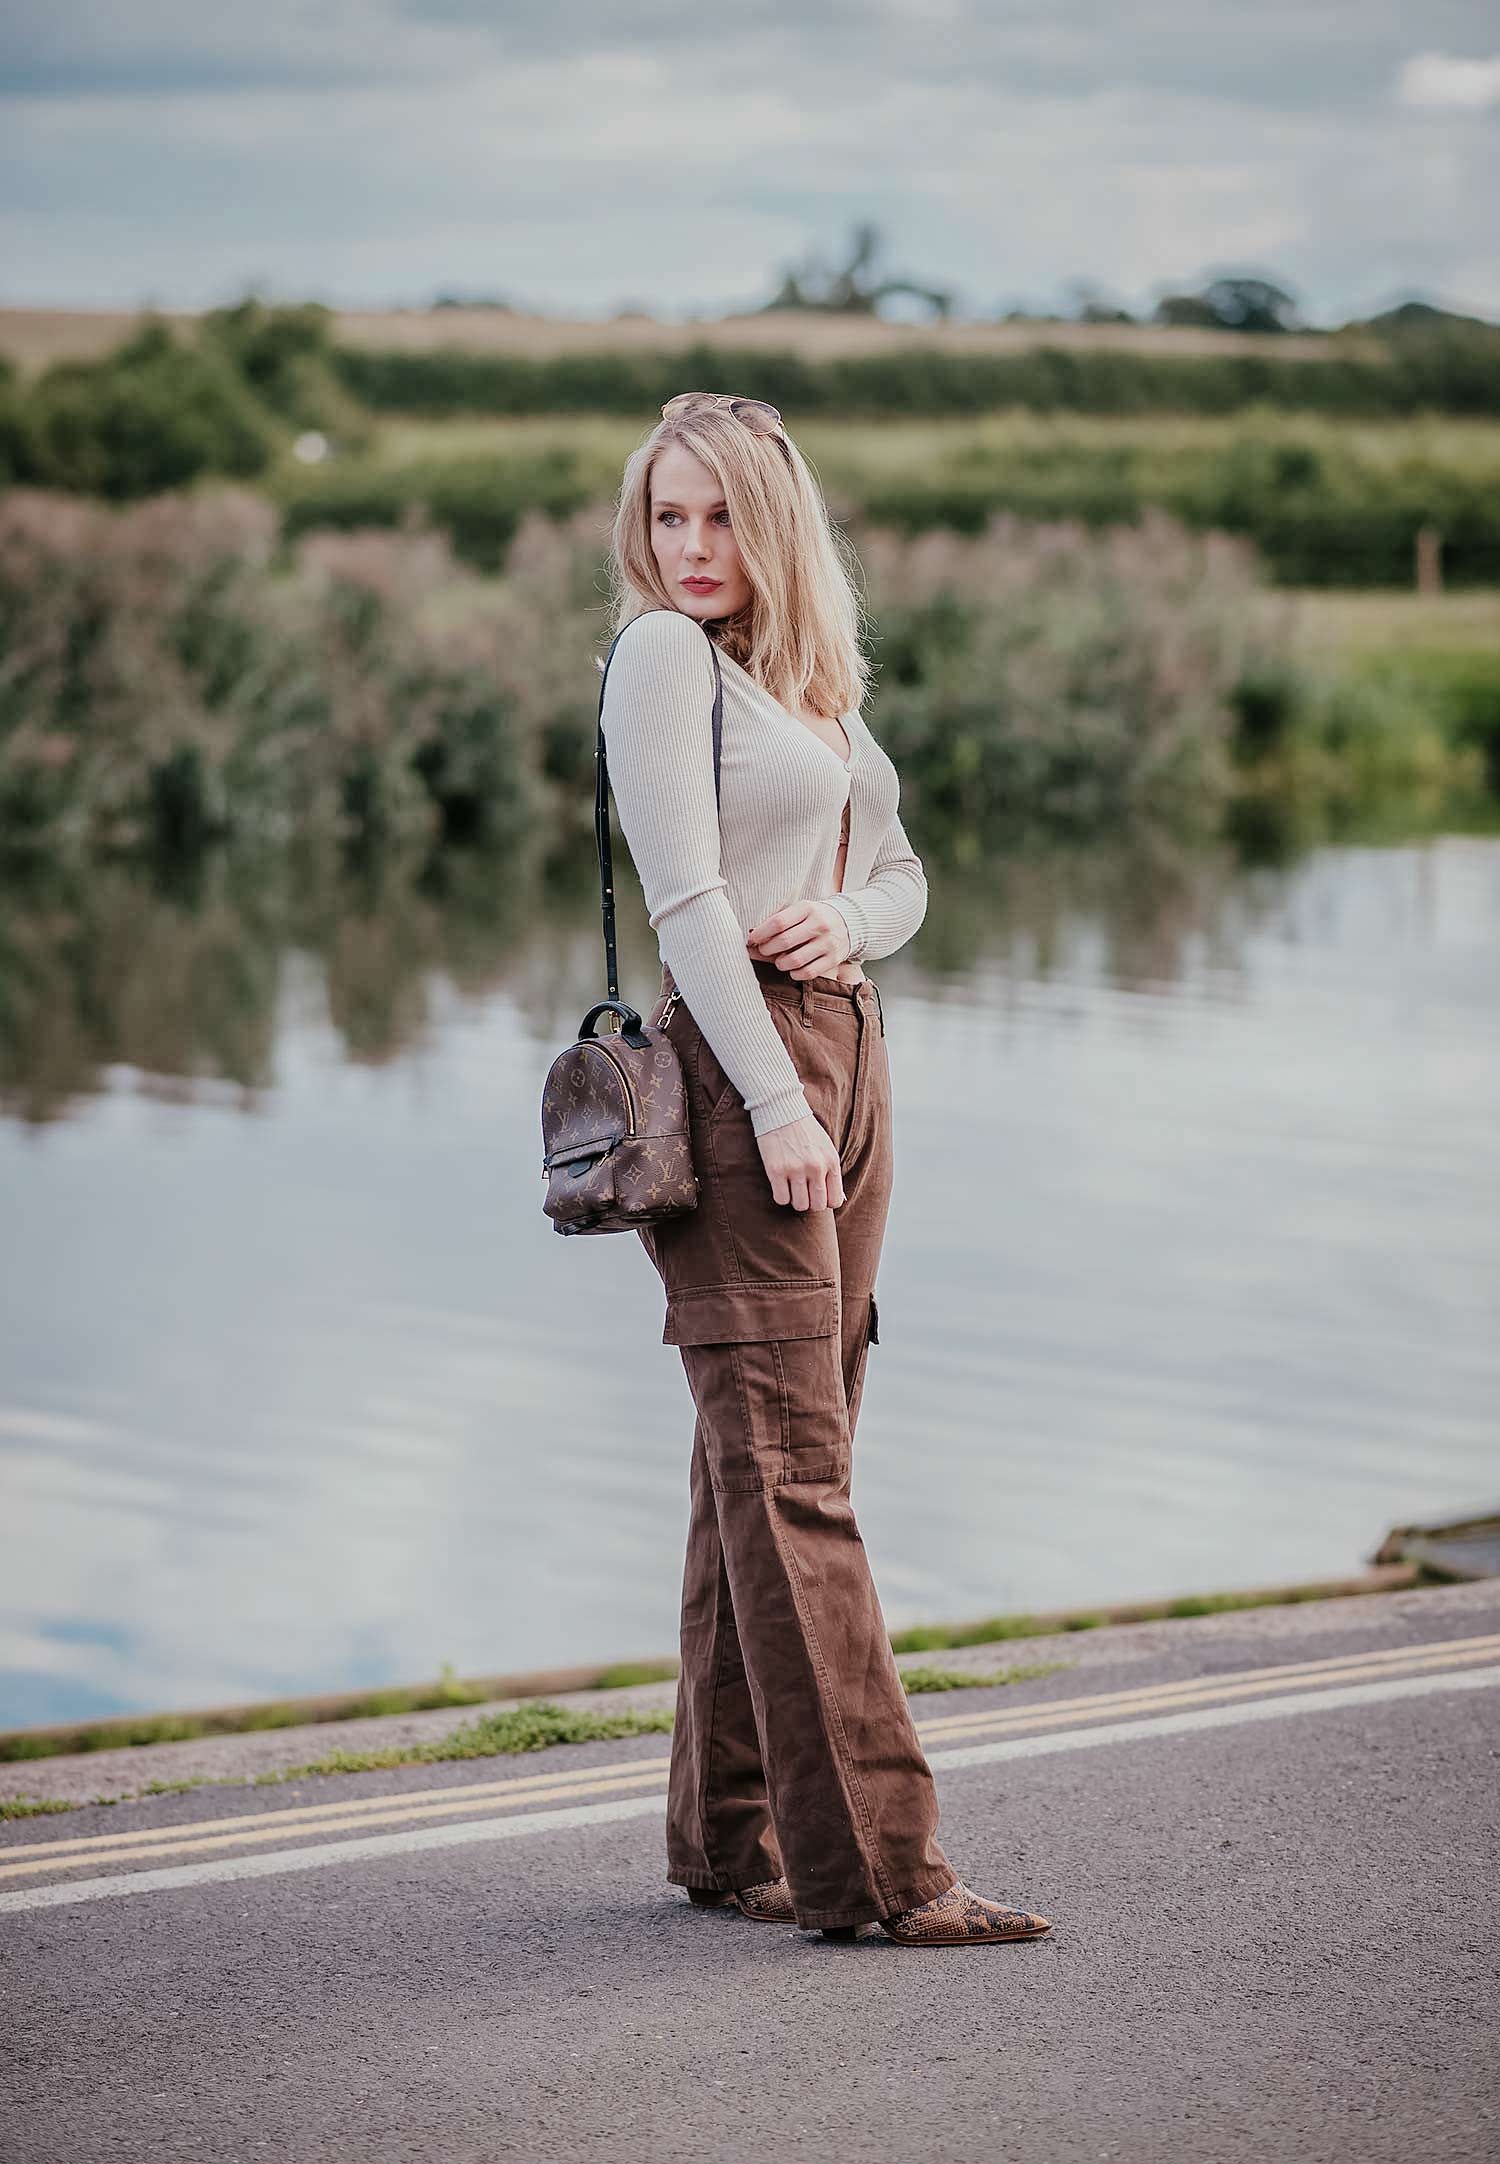 How to Style Cargo Pants if You're Petite